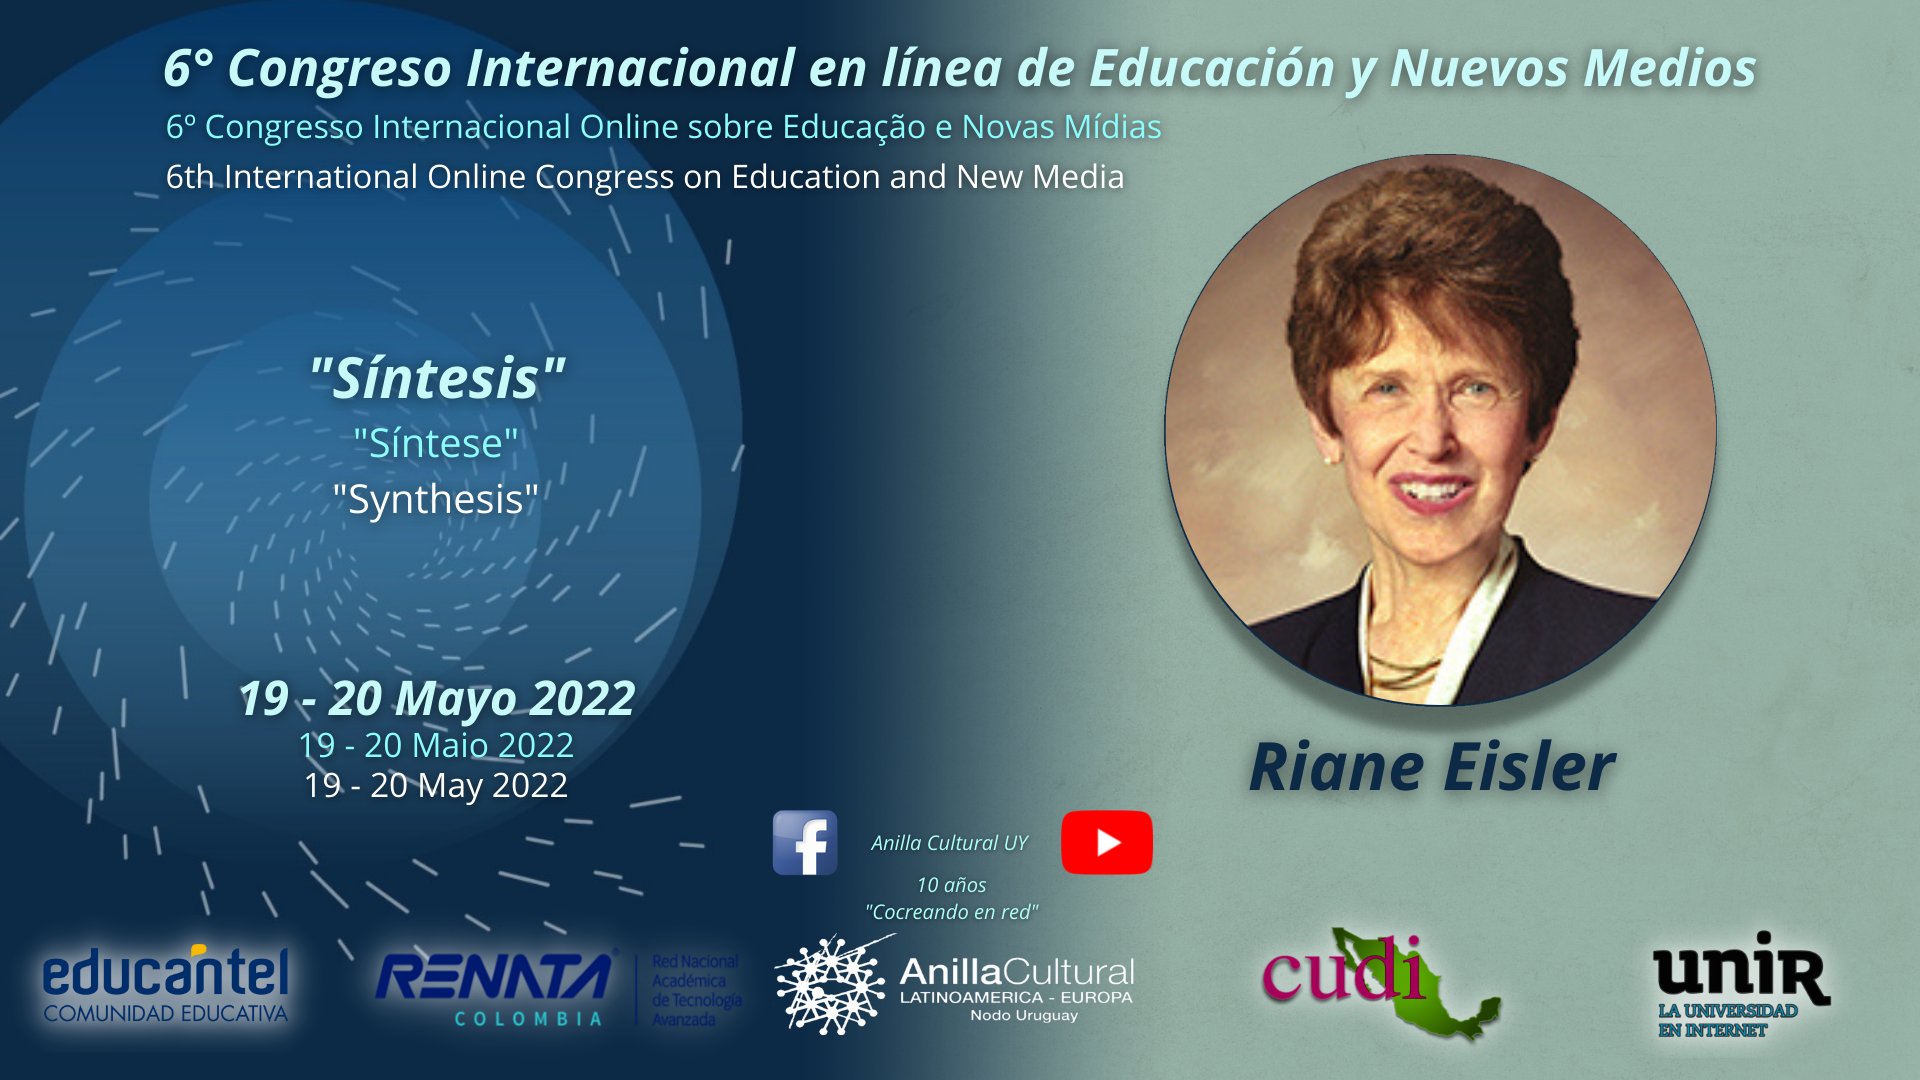 Riane Eisler 2022 Uruguay International Conference on Policy and Education